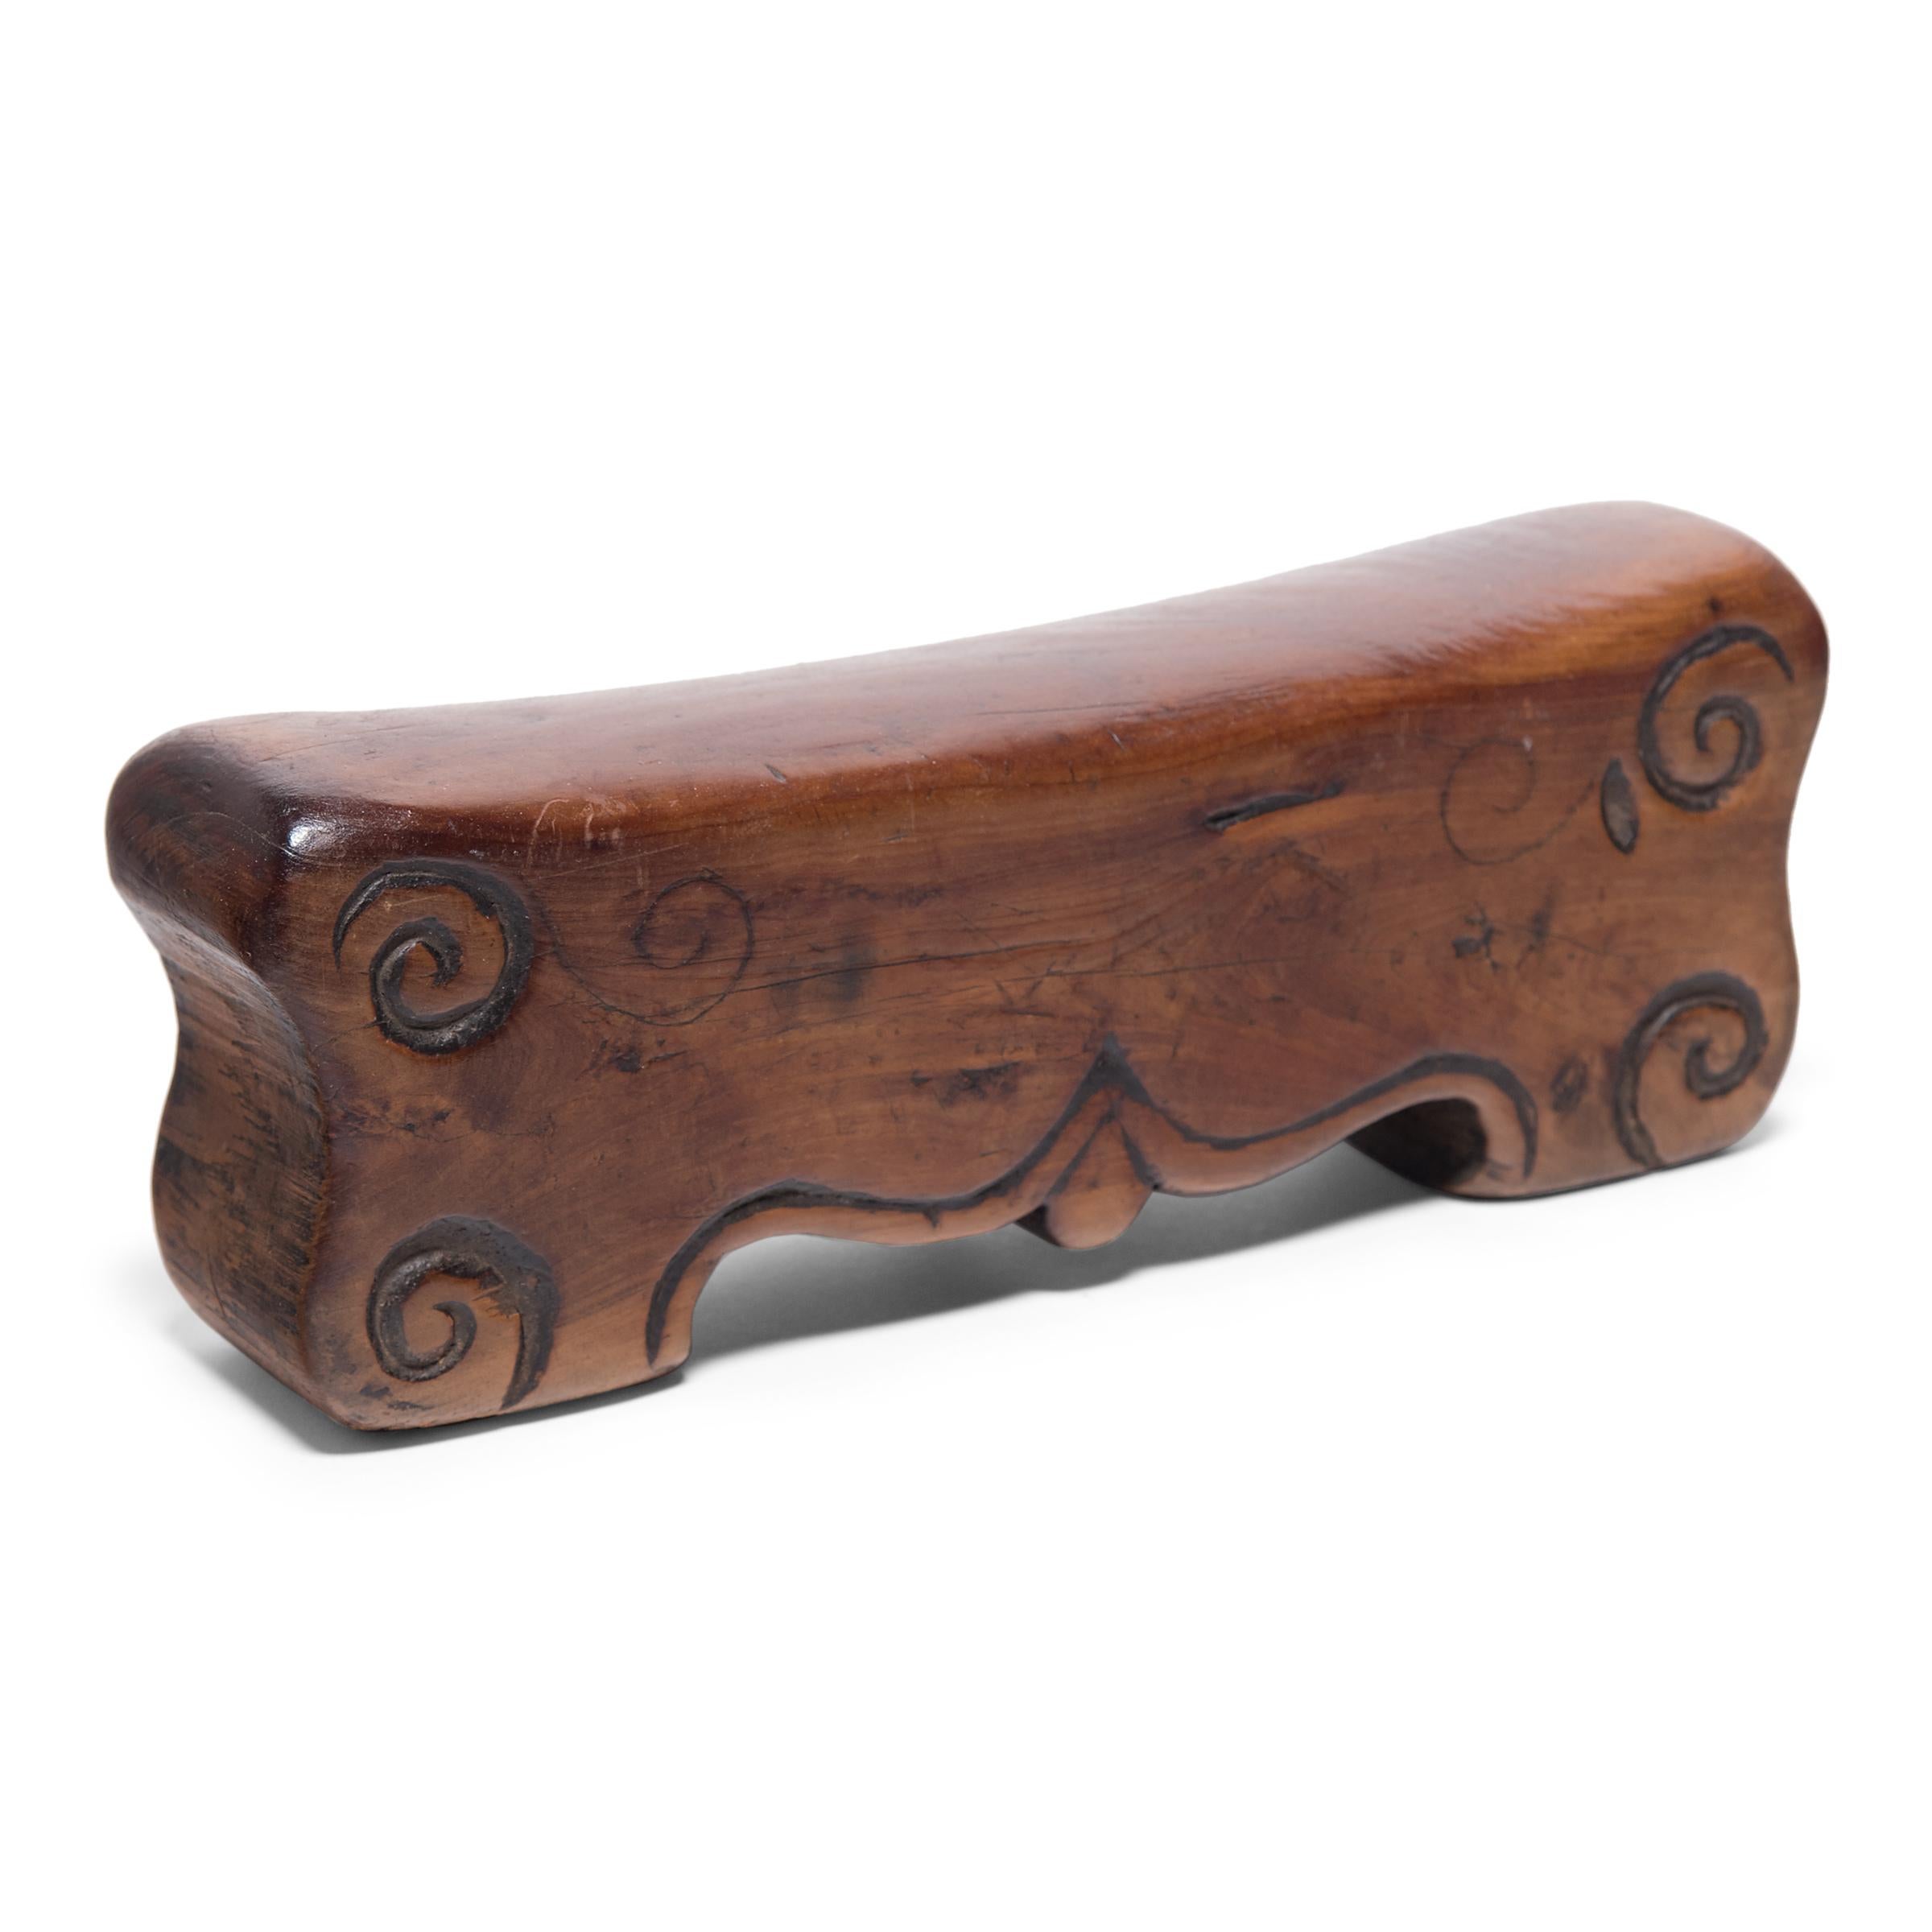 Carved Provincial Chinese Scrollwork Headrest, circa 1850